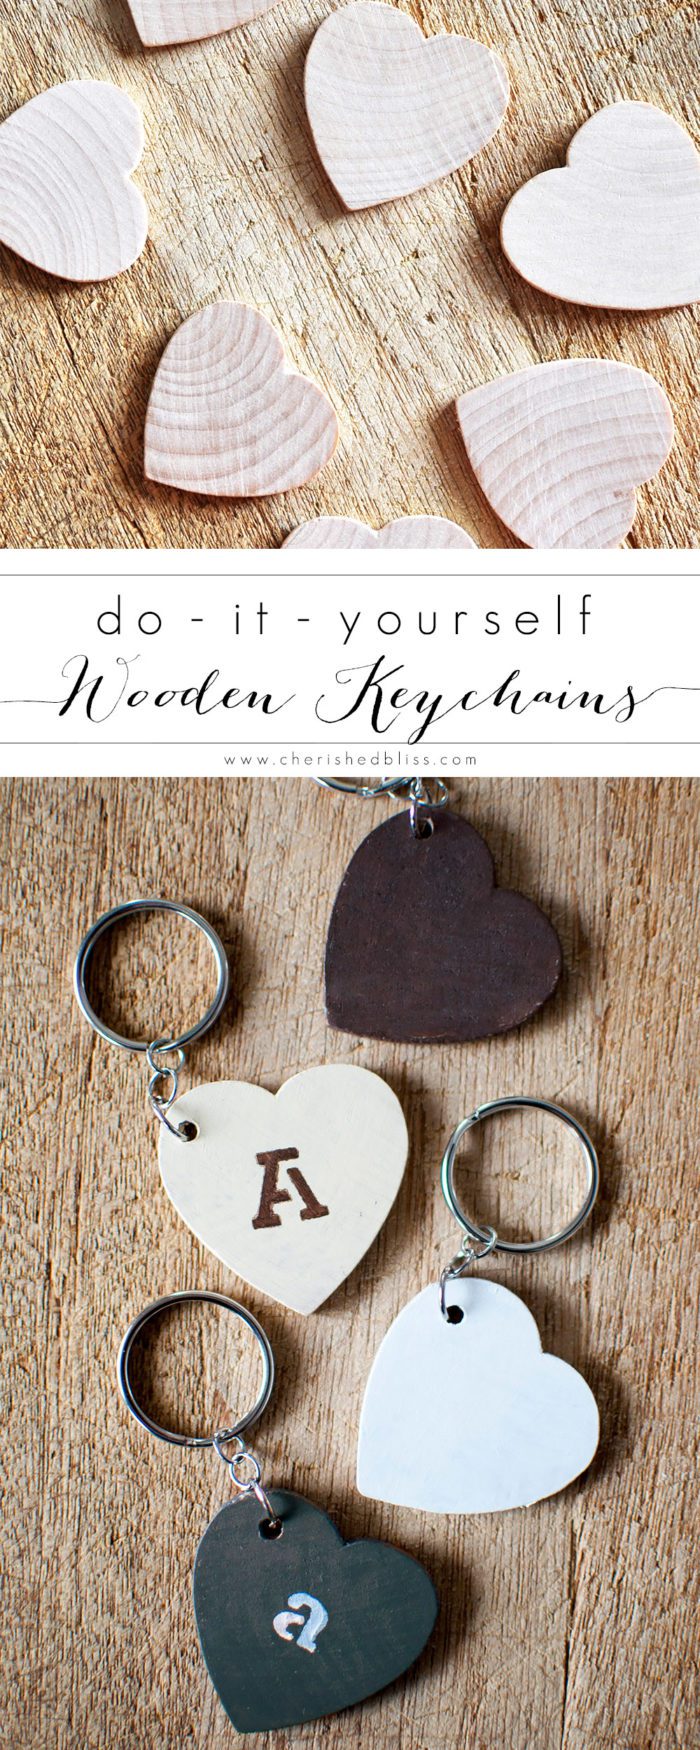 These DIY Keychains couldn't be easier to make, and they are the perfect handmade gift for any age! Get the tutorial at CherishedBliss.com